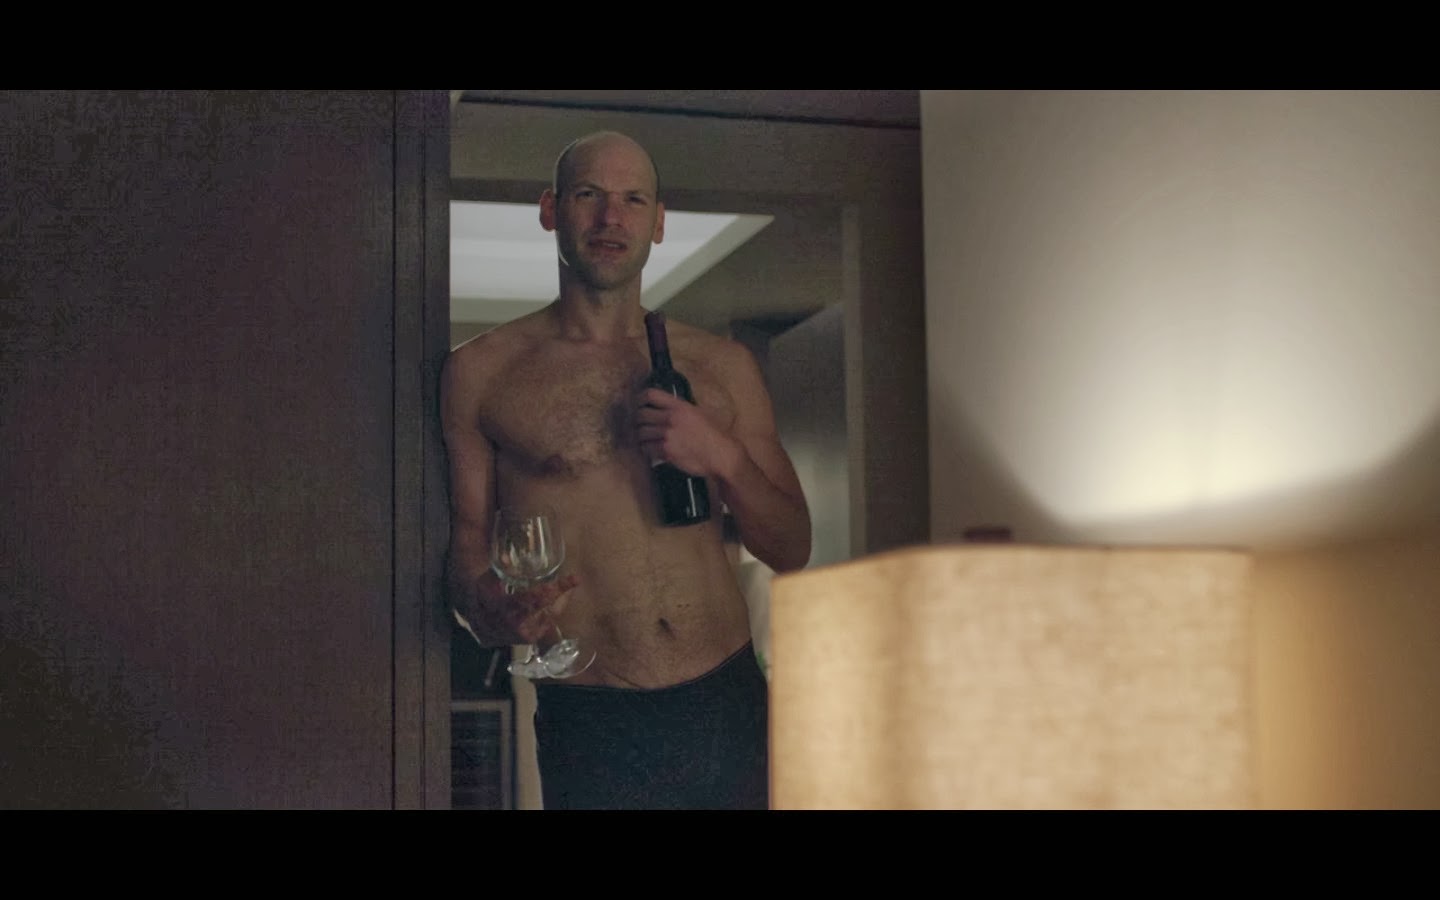 House of Cards 1x01 - Corey Stoll.